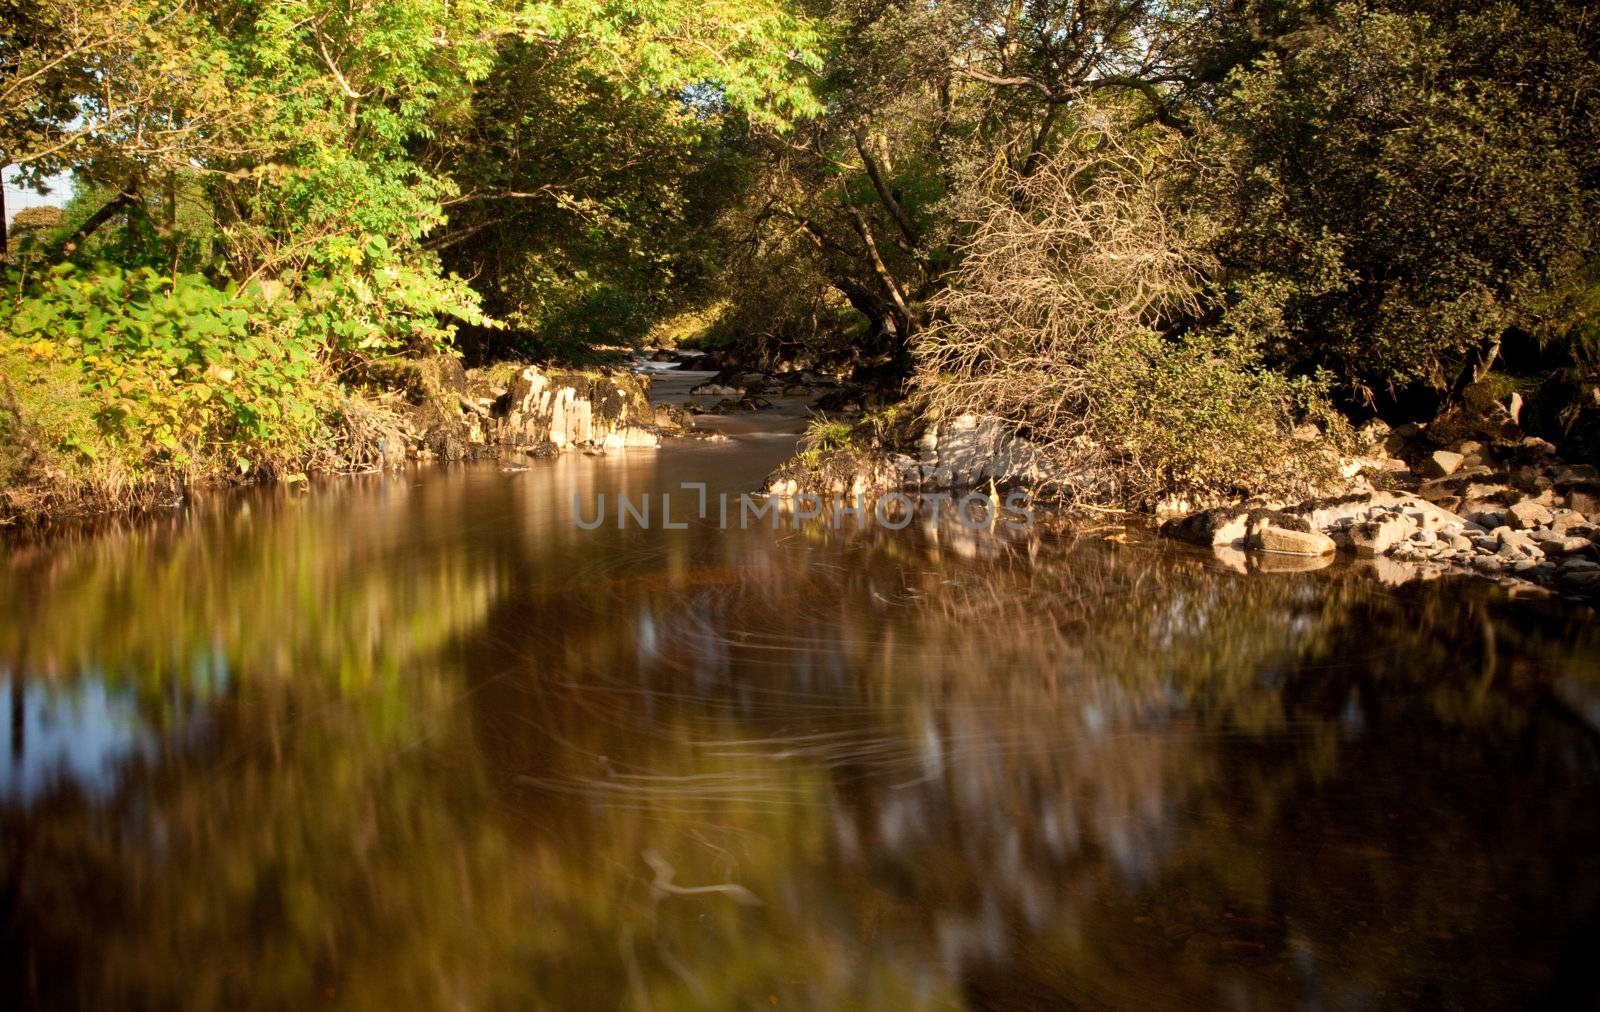 Slow motion water in secluded river by steheap